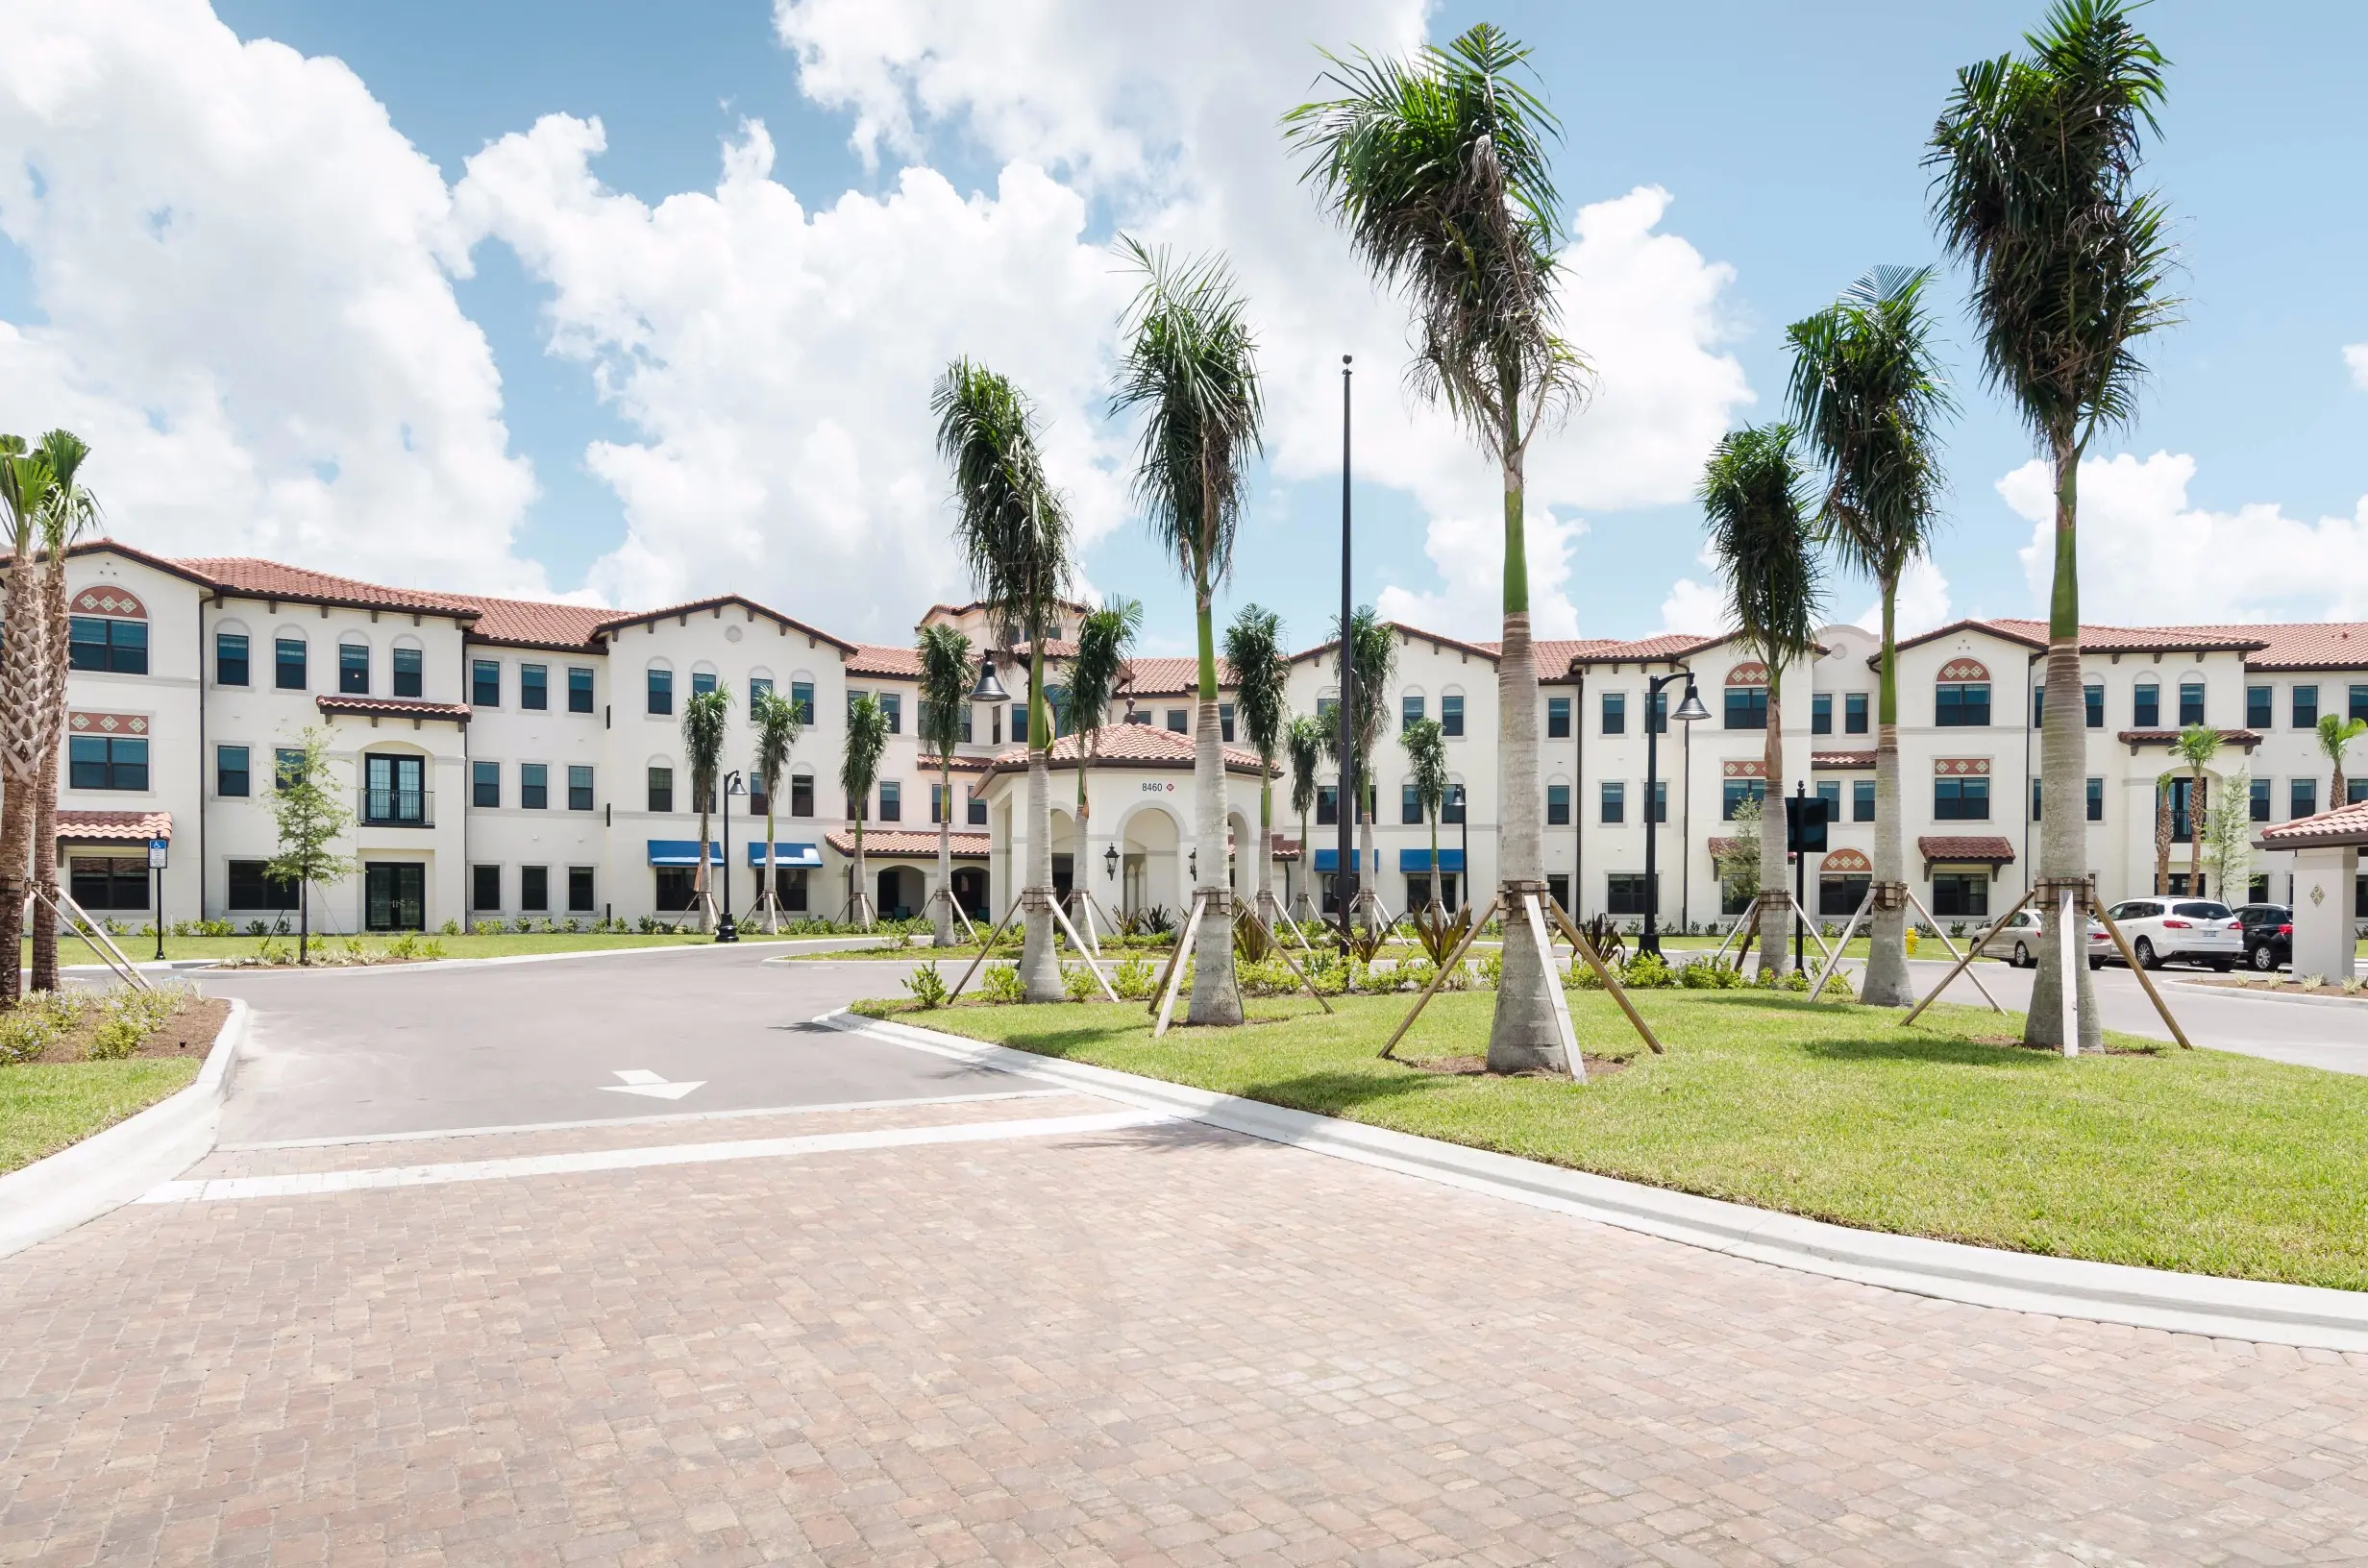 Exterior shot / driveway of American House Coconut Point, a retirement community in Estero, FL